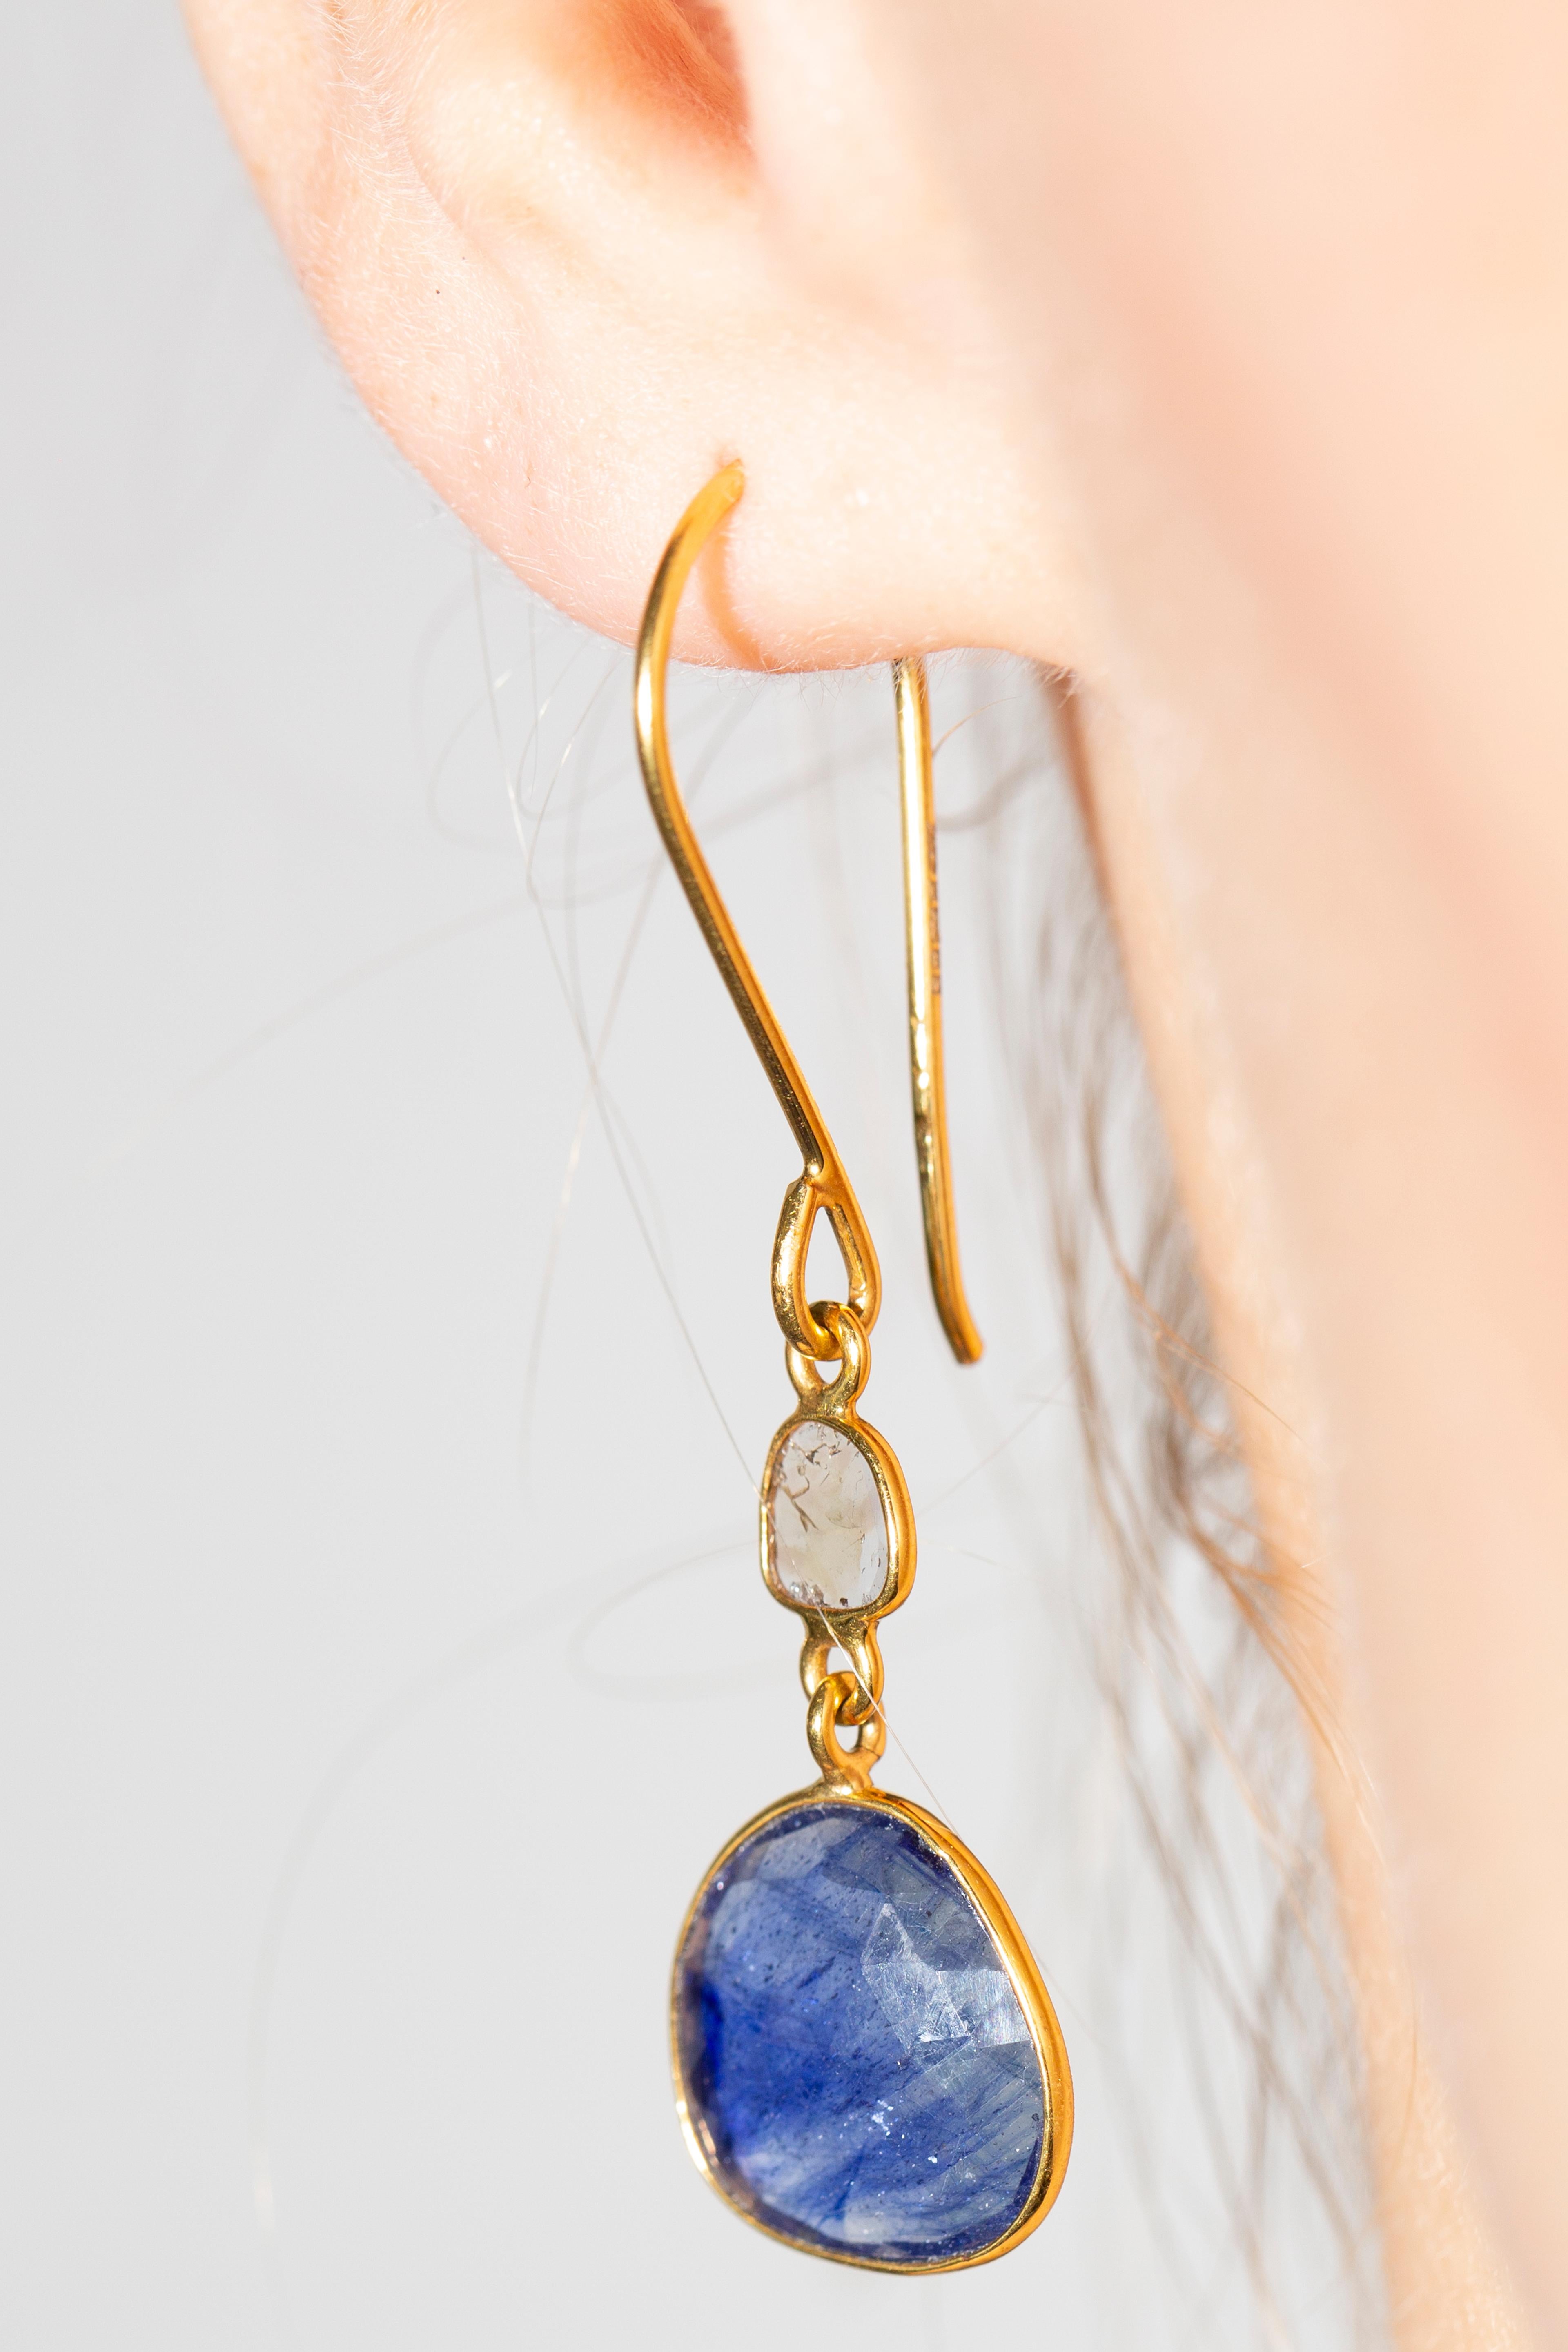 These Gorgeous 7.50 Carat Rose Cut Blue Sapphire Earrings from the Artisan Collection made by Tresor Paris featuring 0.18 Carat in two Diamond slices set in 18 Karat Yellow Gold. Each piece is hand made with a unique shaped precious stones. These